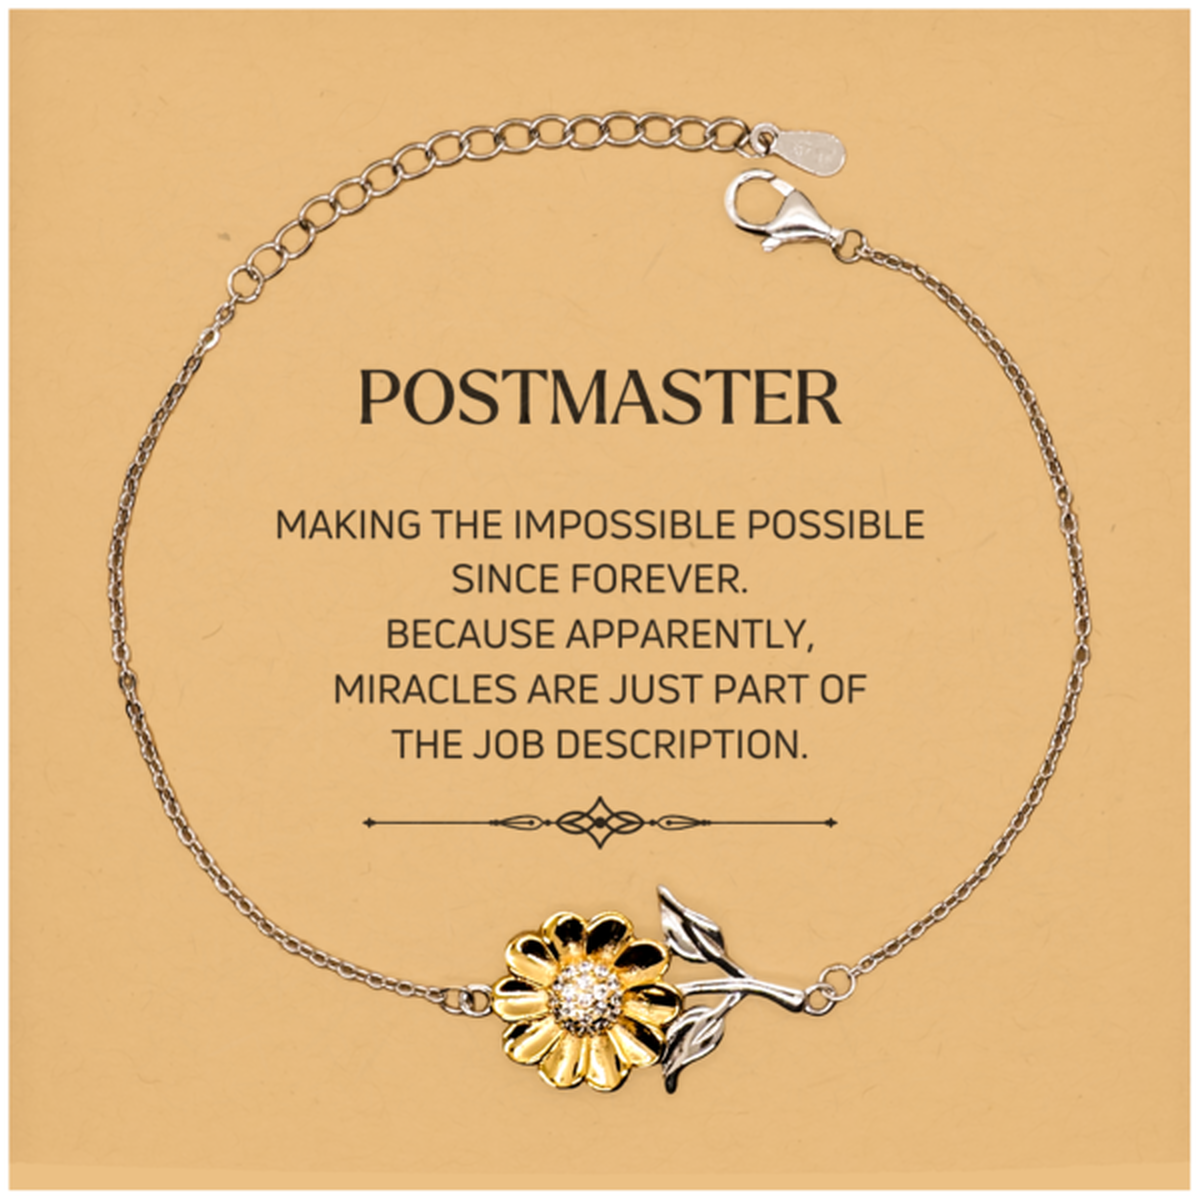 Funny Postmaster Gifts, Miracles are just part of the job description, Inspirational Birthday Christmas Sunflower Bracelet For Postmaster, Men, Women, Coworkers, Friends, Boss